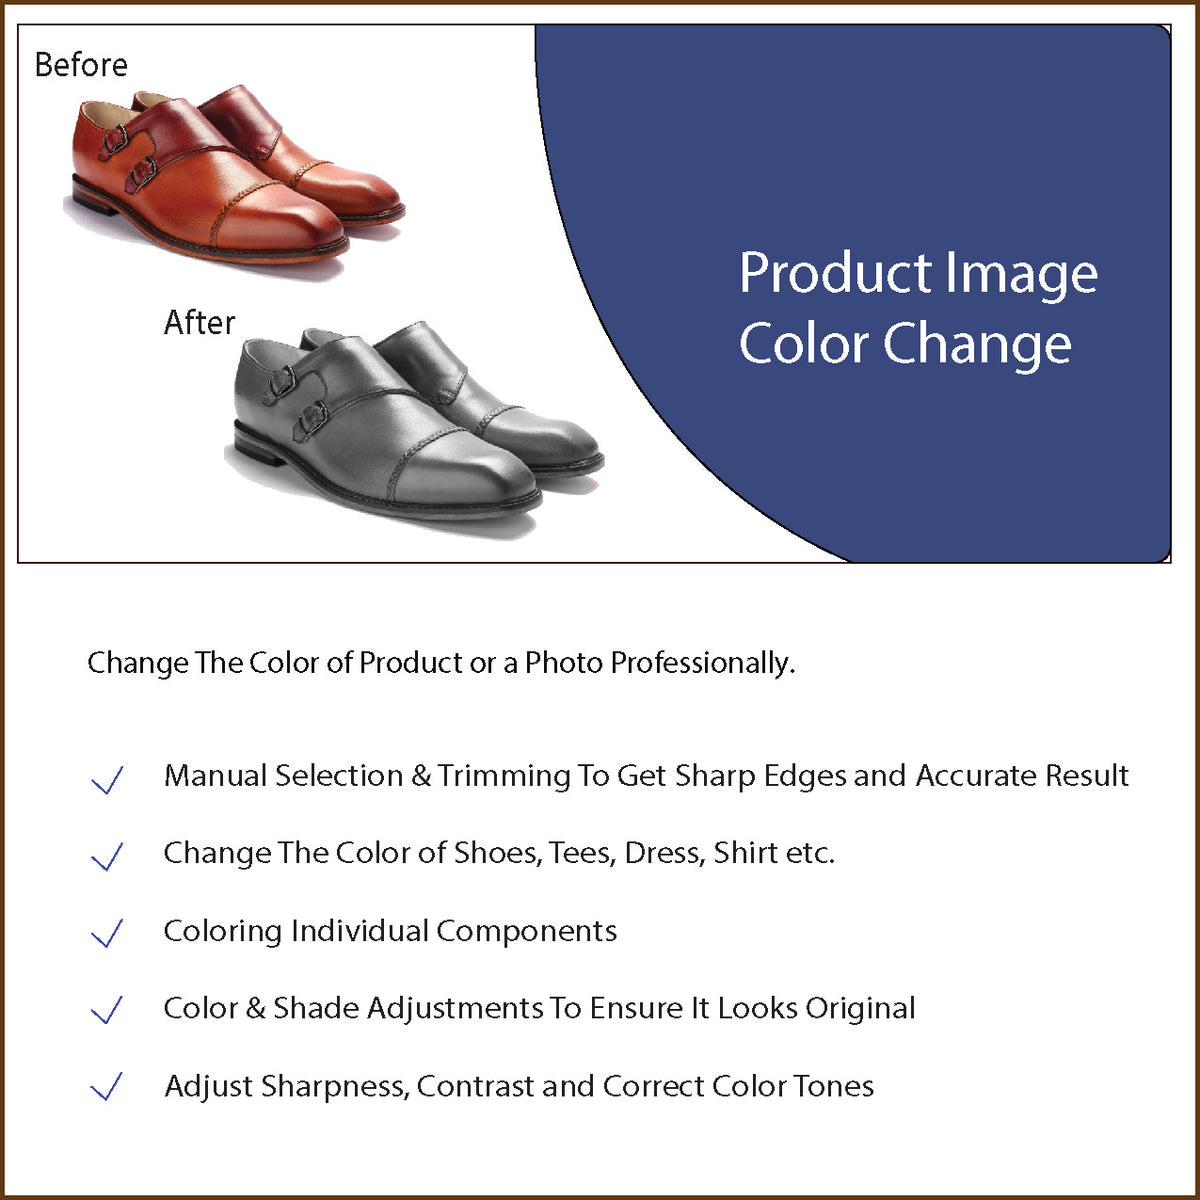 Product Image - Color Change